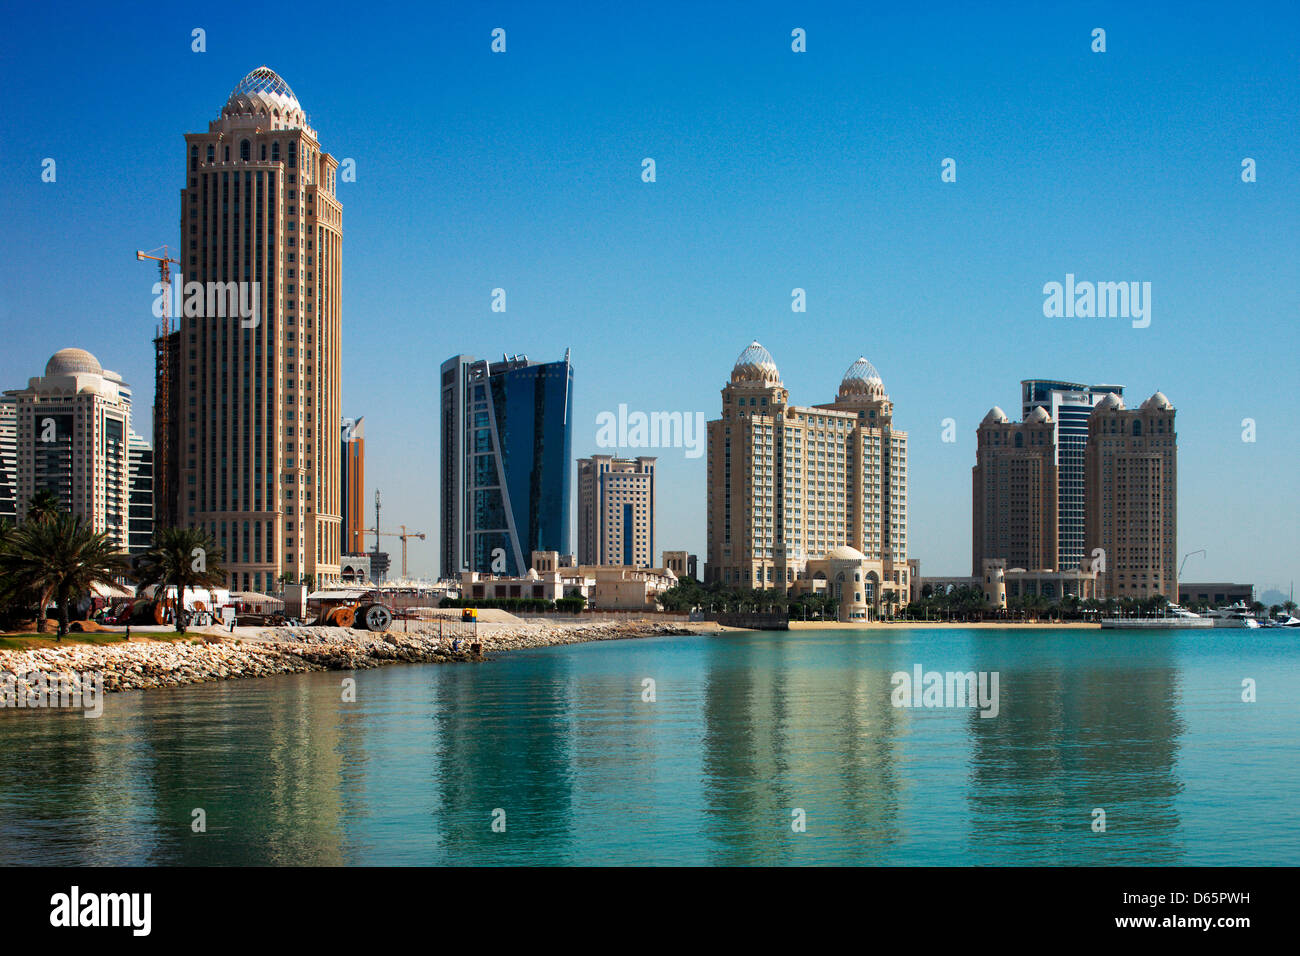 Numerous new hotels are springing up in the West Bay area of Doha, Qatar Stock Photo